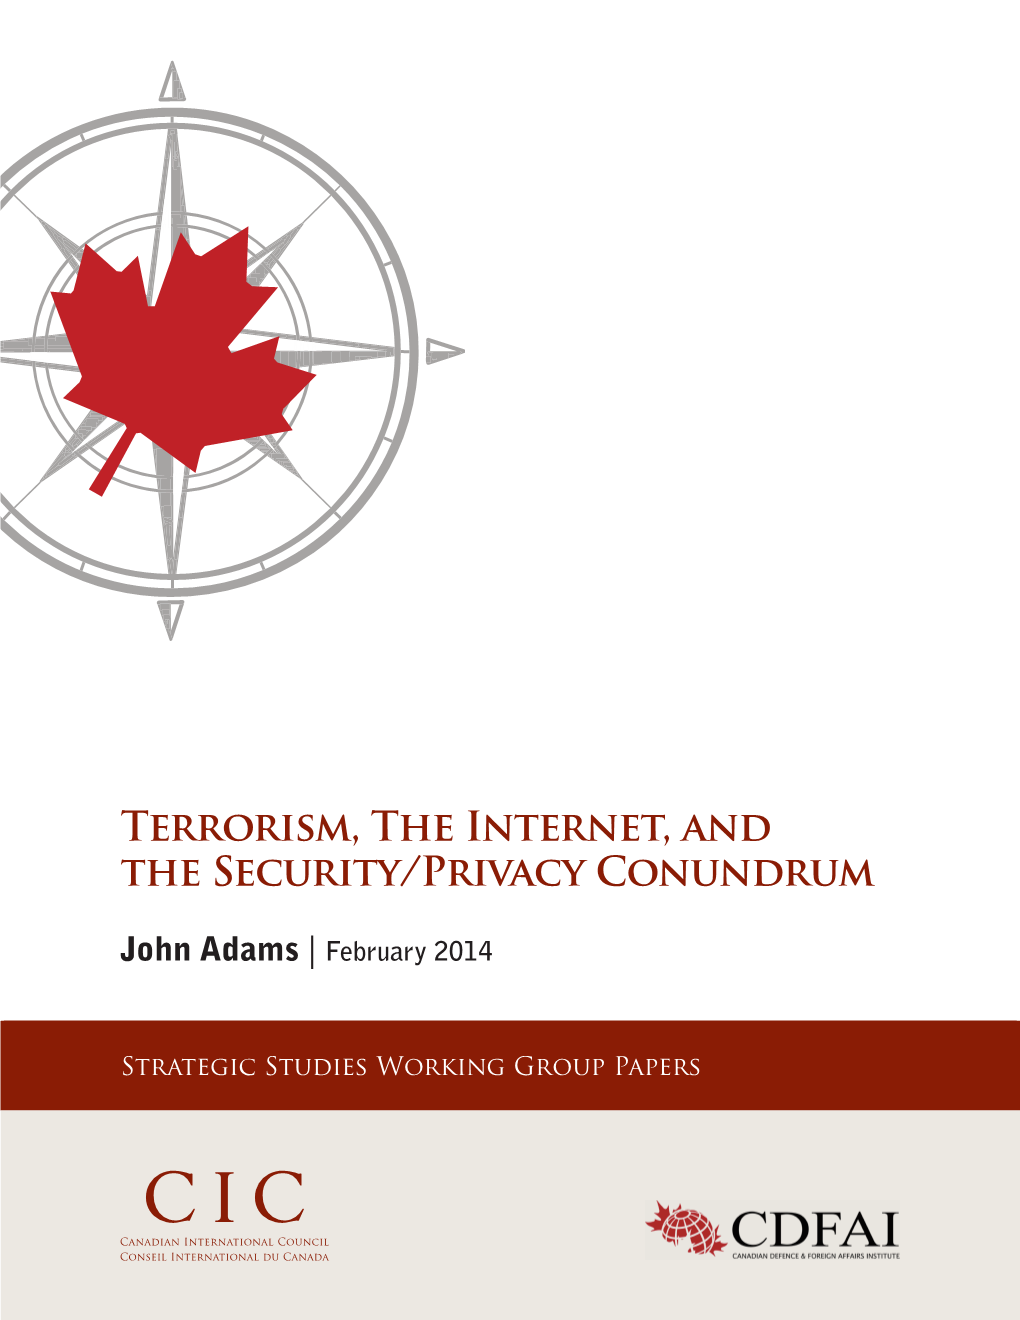 Terrorism, the Internet, and the Security/Privacy Conundrum